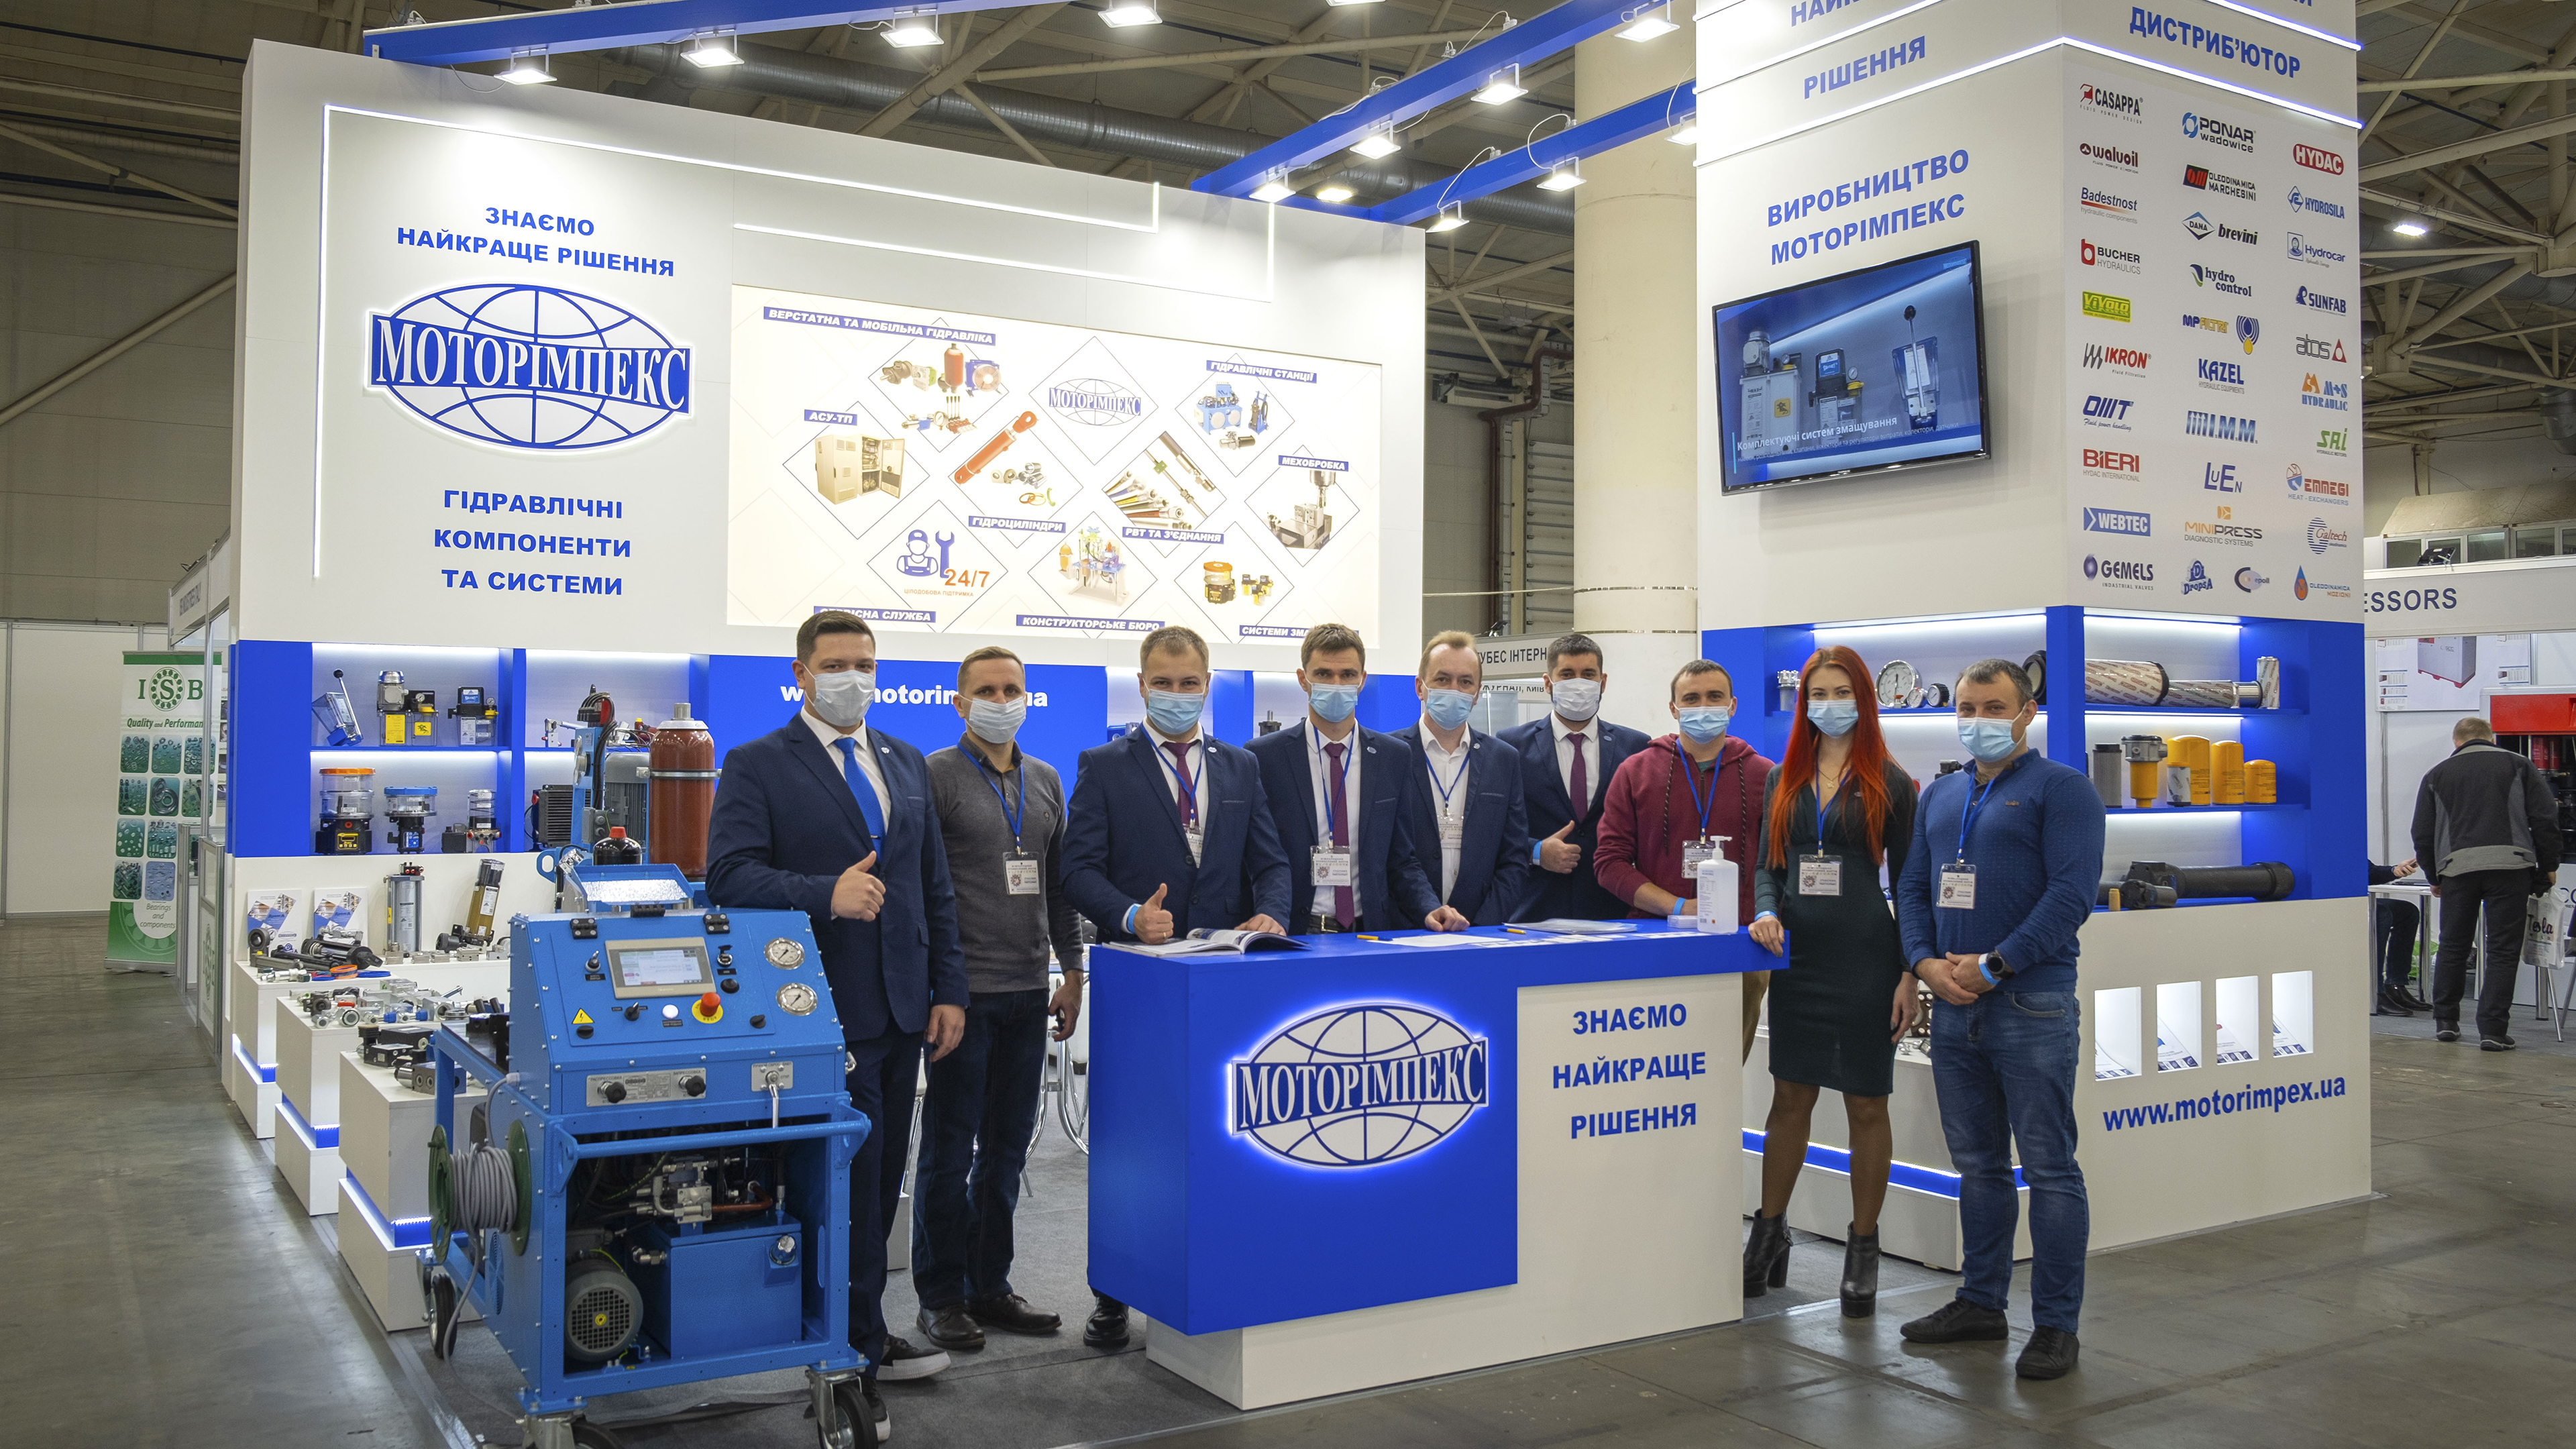 'Motorimpex' Group of companies at the International Industrial Forum 2020